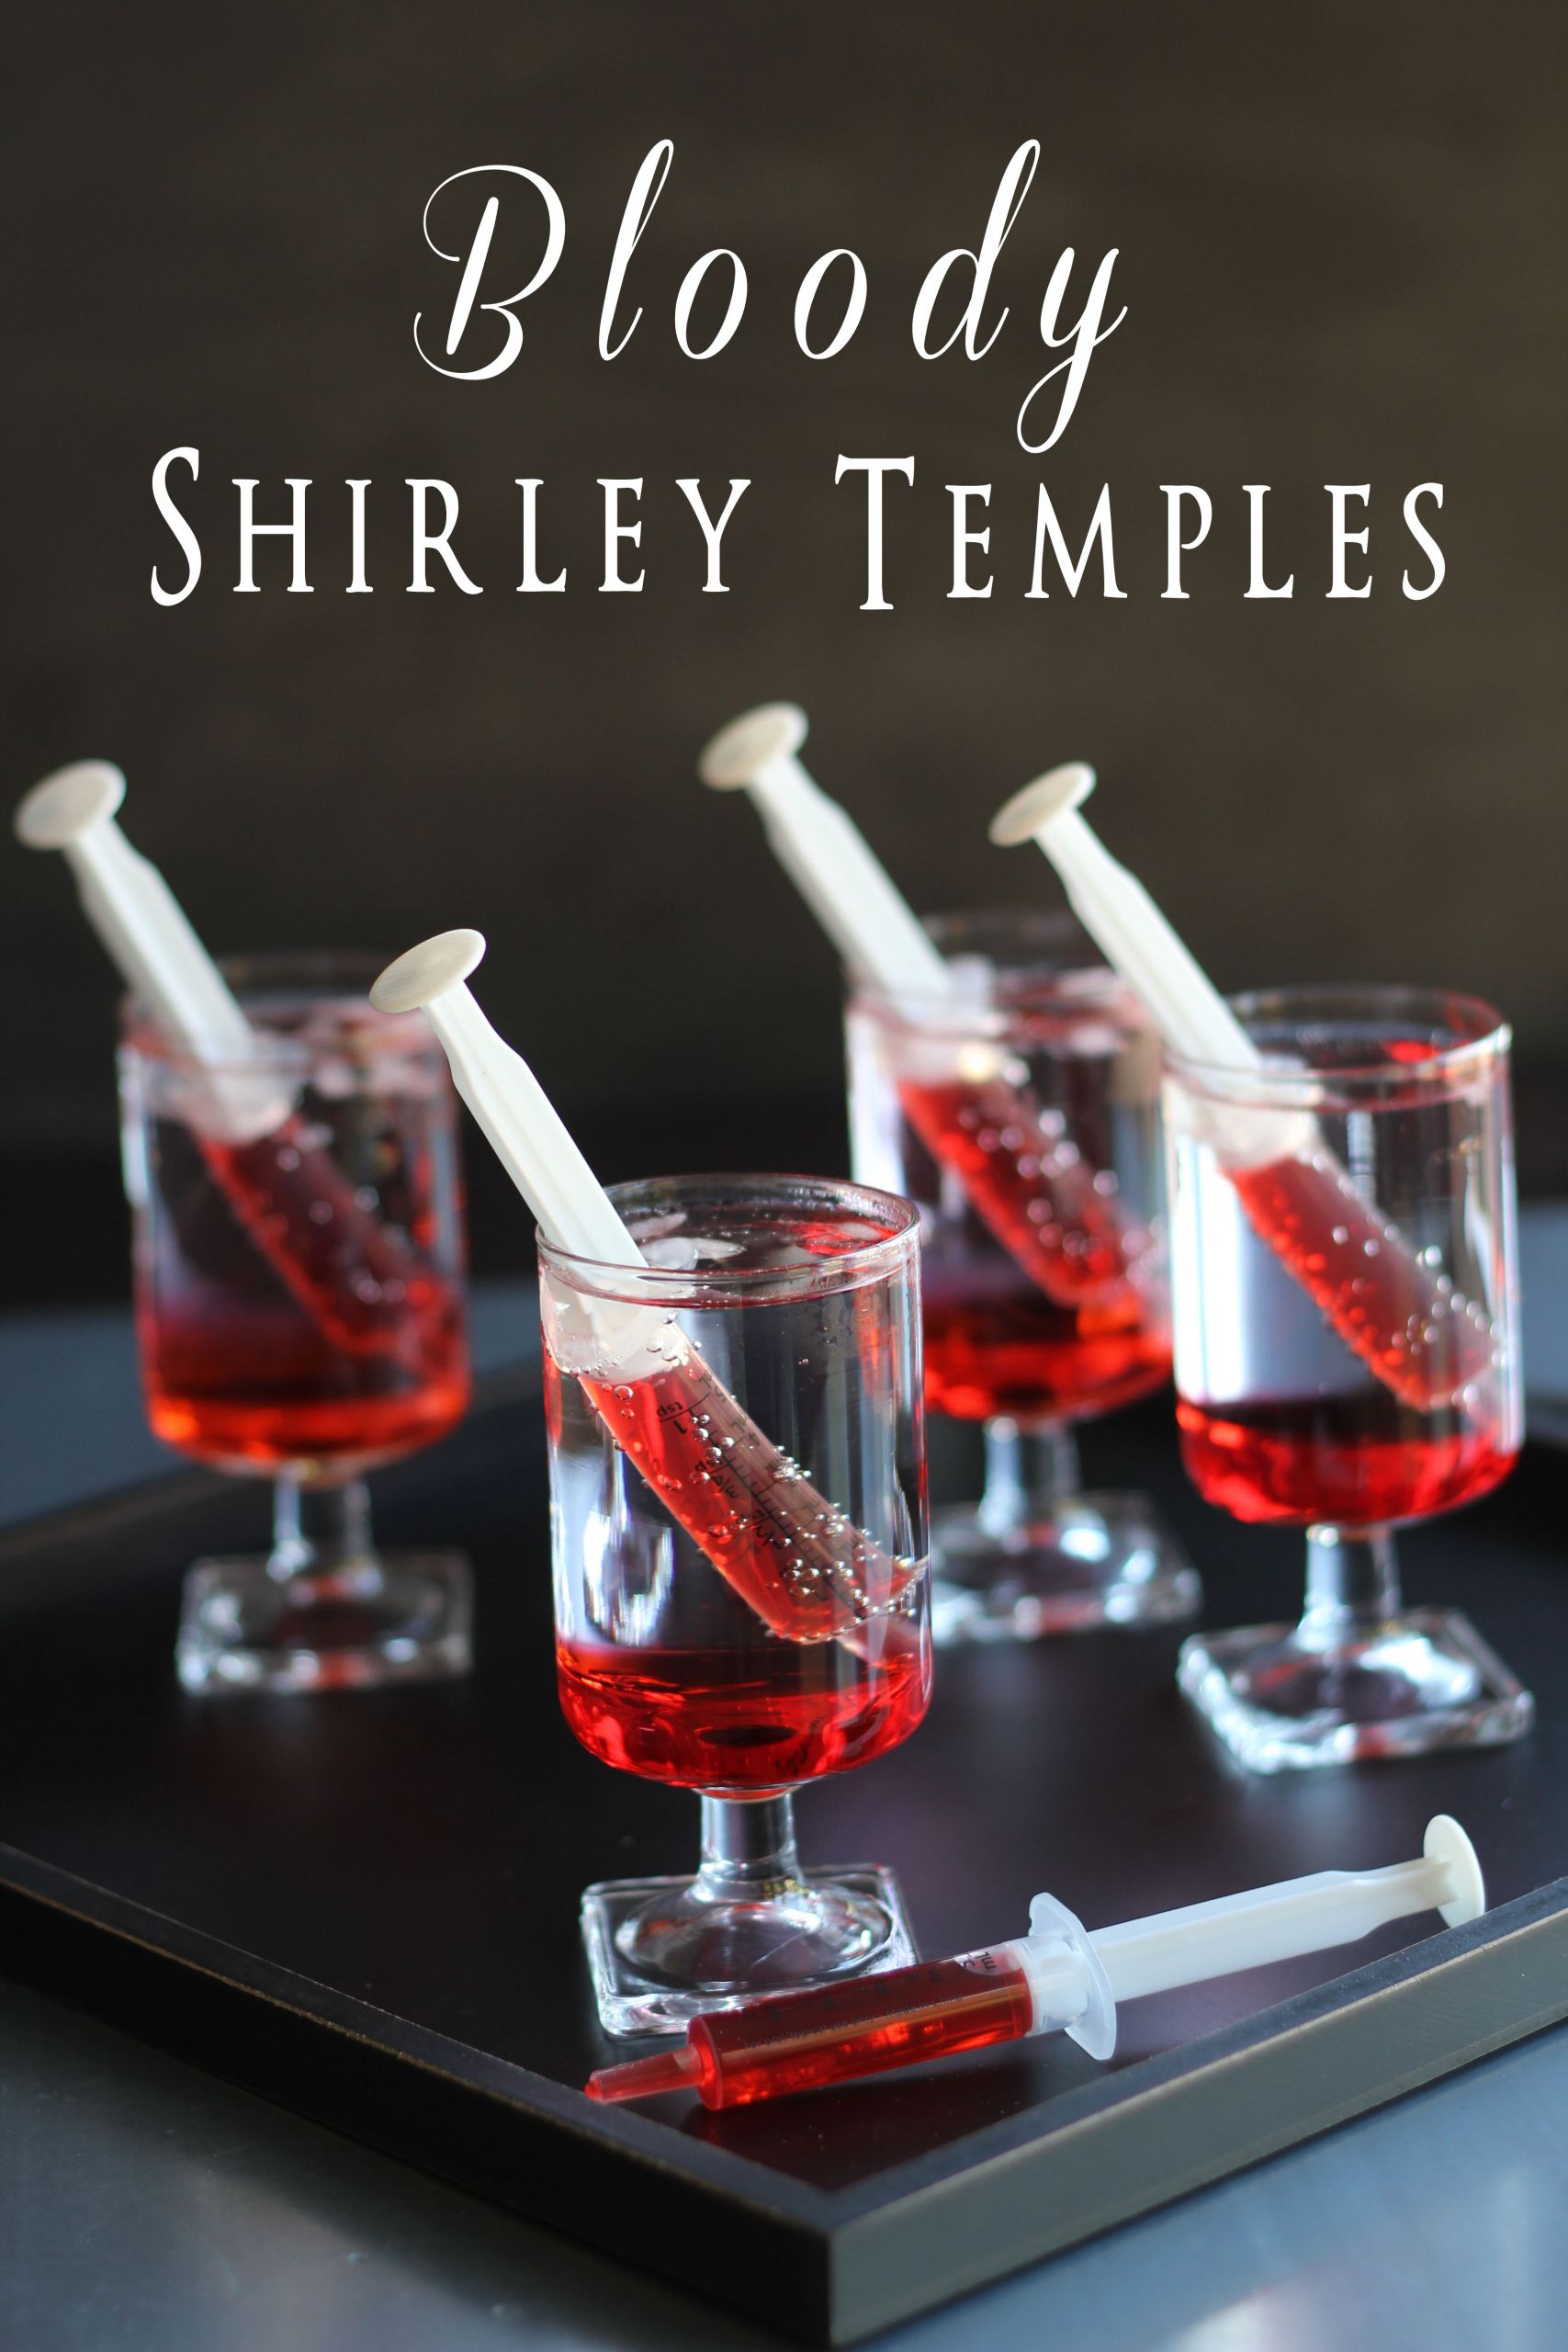 Halloween Party Drink Ideas For Adults
 Bloody Shirley Temples TGIF This Grandma is Fun